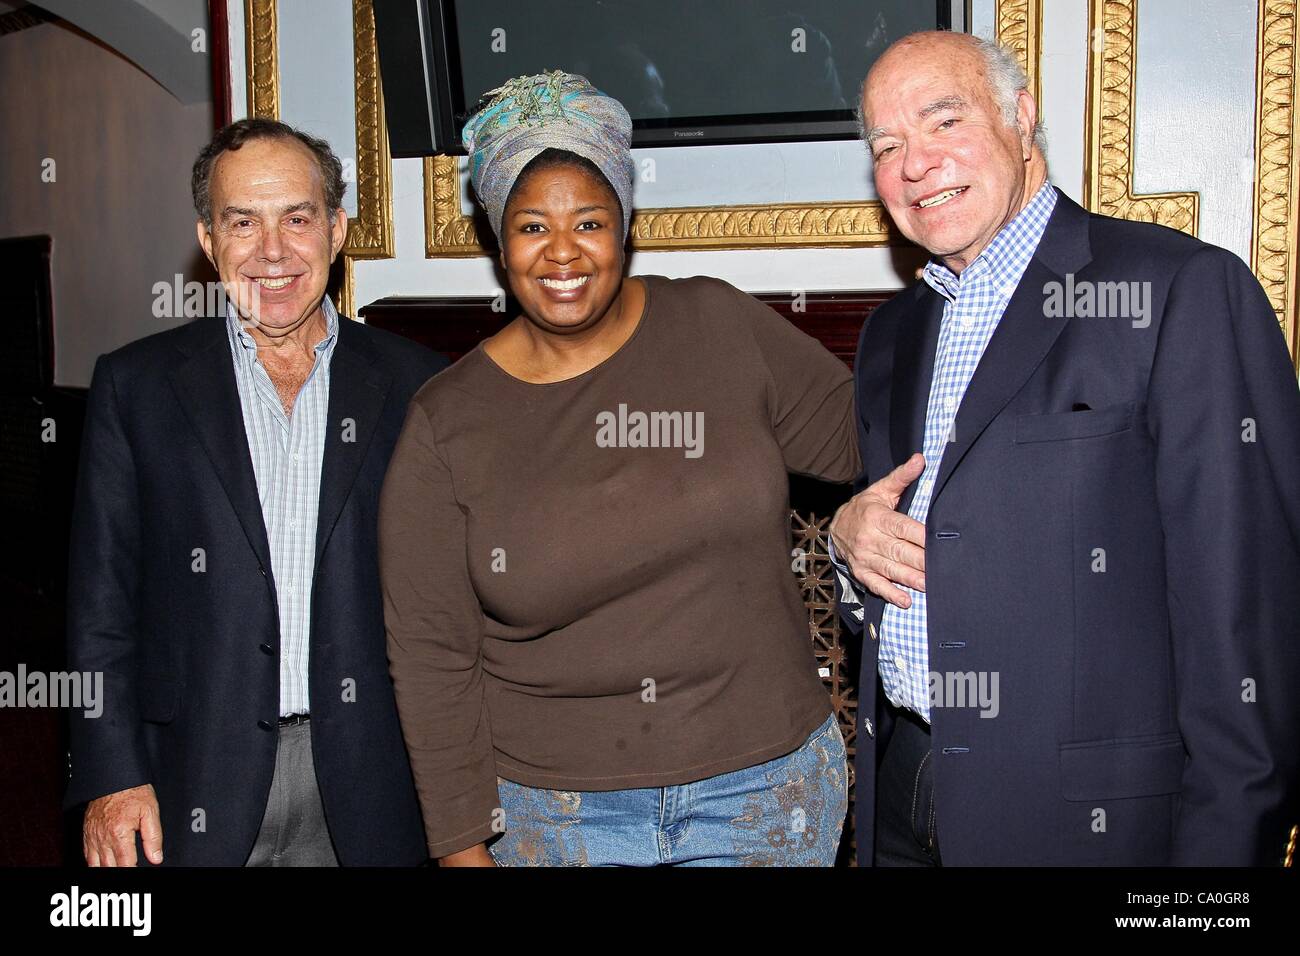 Marc Gershwin, Natasha Yvette-Williams, Mike Strunsky at arrivals for The George and Ira Gershwin Theatre Education Program Launch Event, The Richard Rodgers Theatre, New York, NY March 13, 2012. Photo By: Steve Mack/Everett Collection Stock Photo